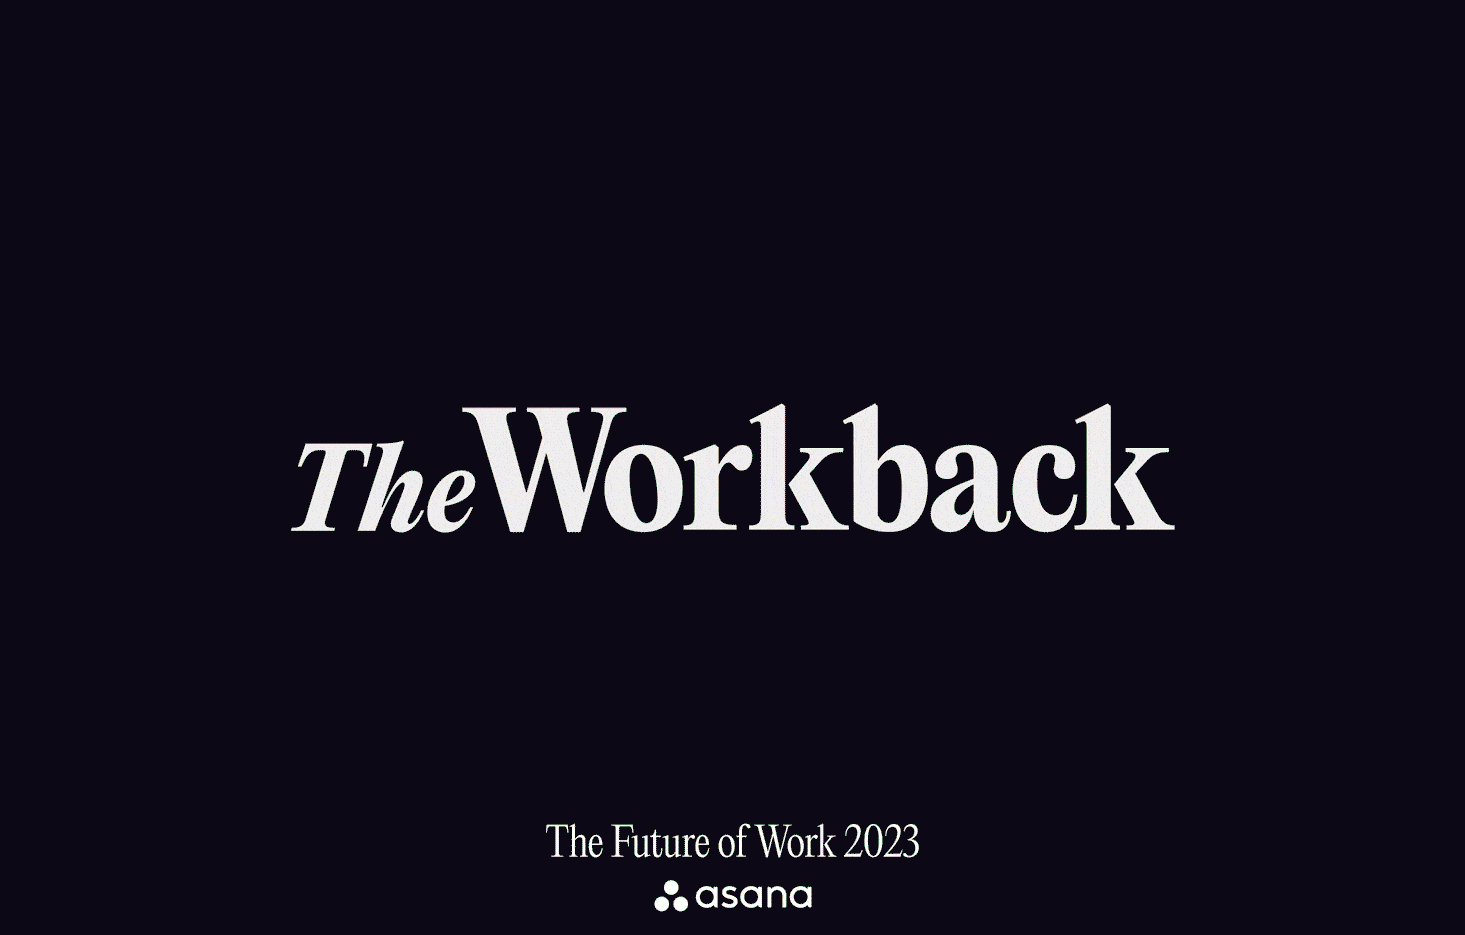 The Future of Work Issue 2023